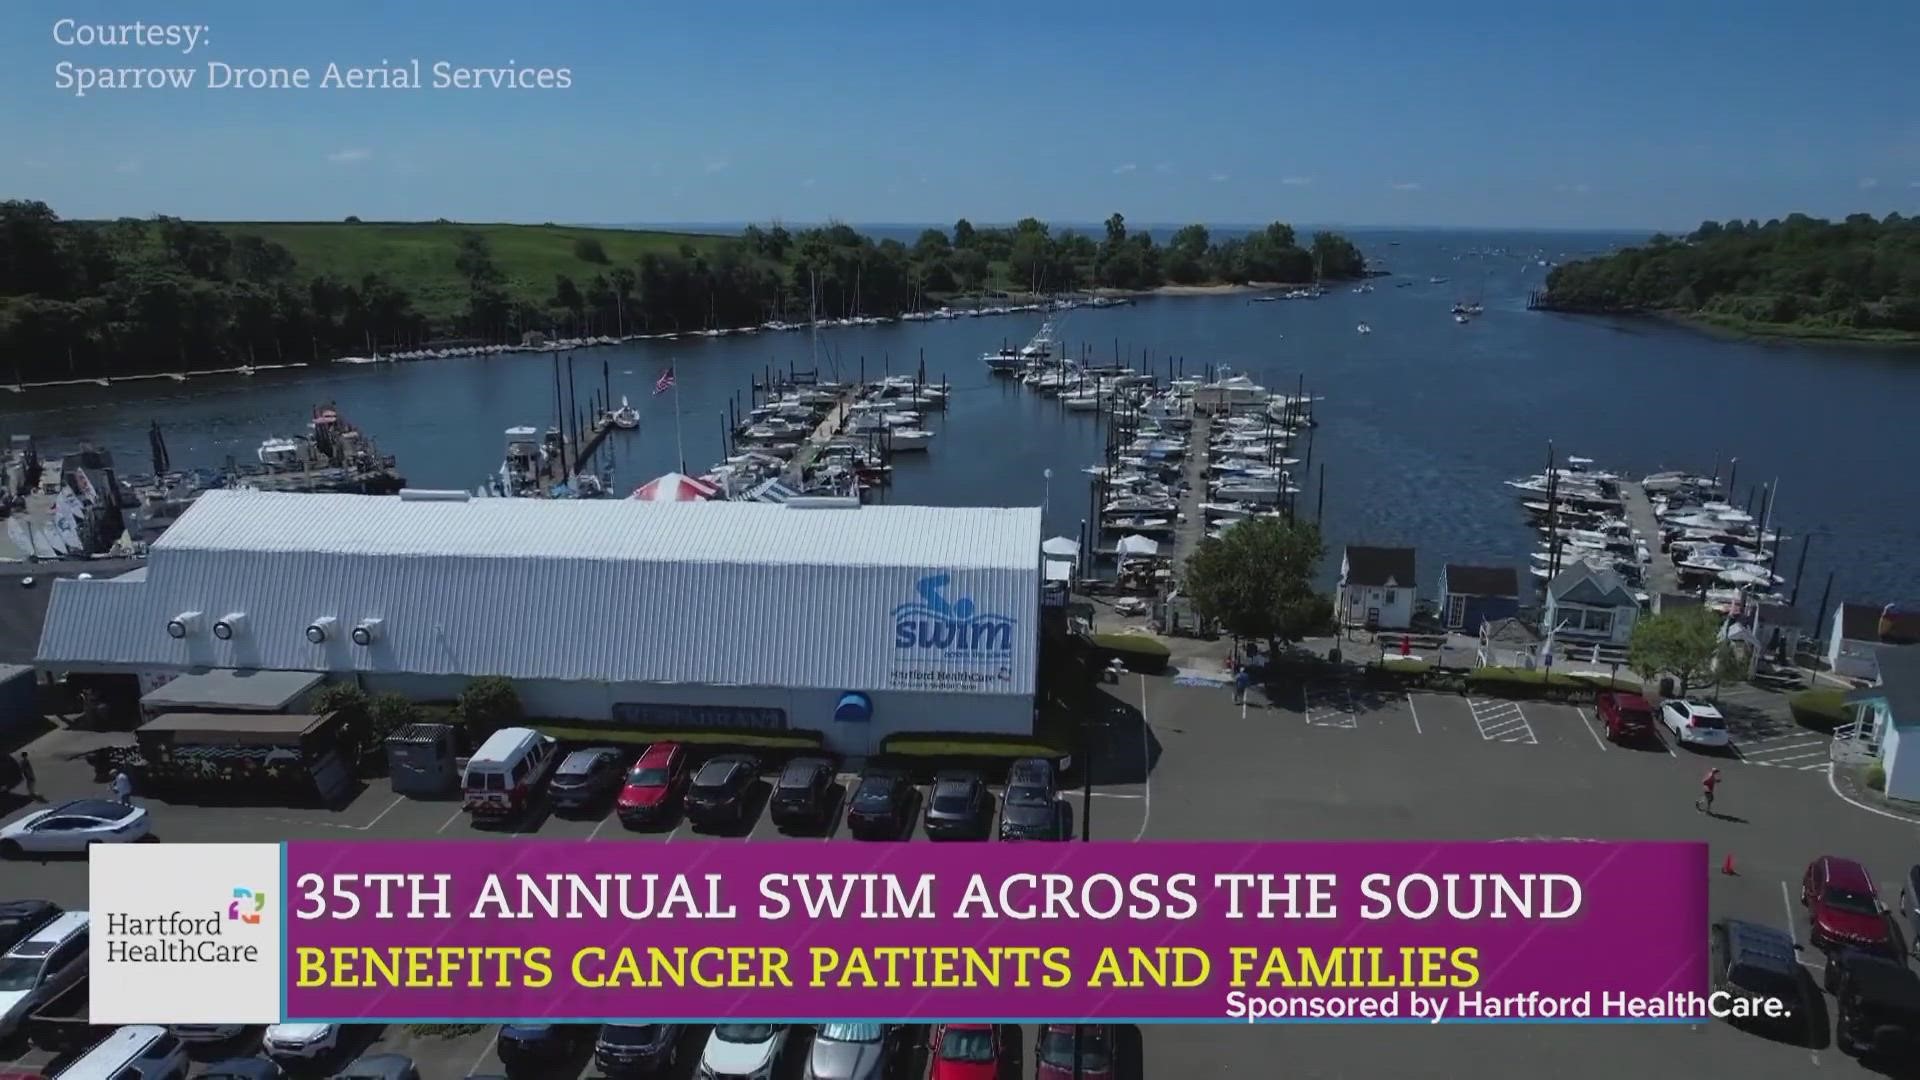 The 35th Annual St. Vincent's Medical Center's Swim Across The Sound raises funds to help cancer patients and their families.